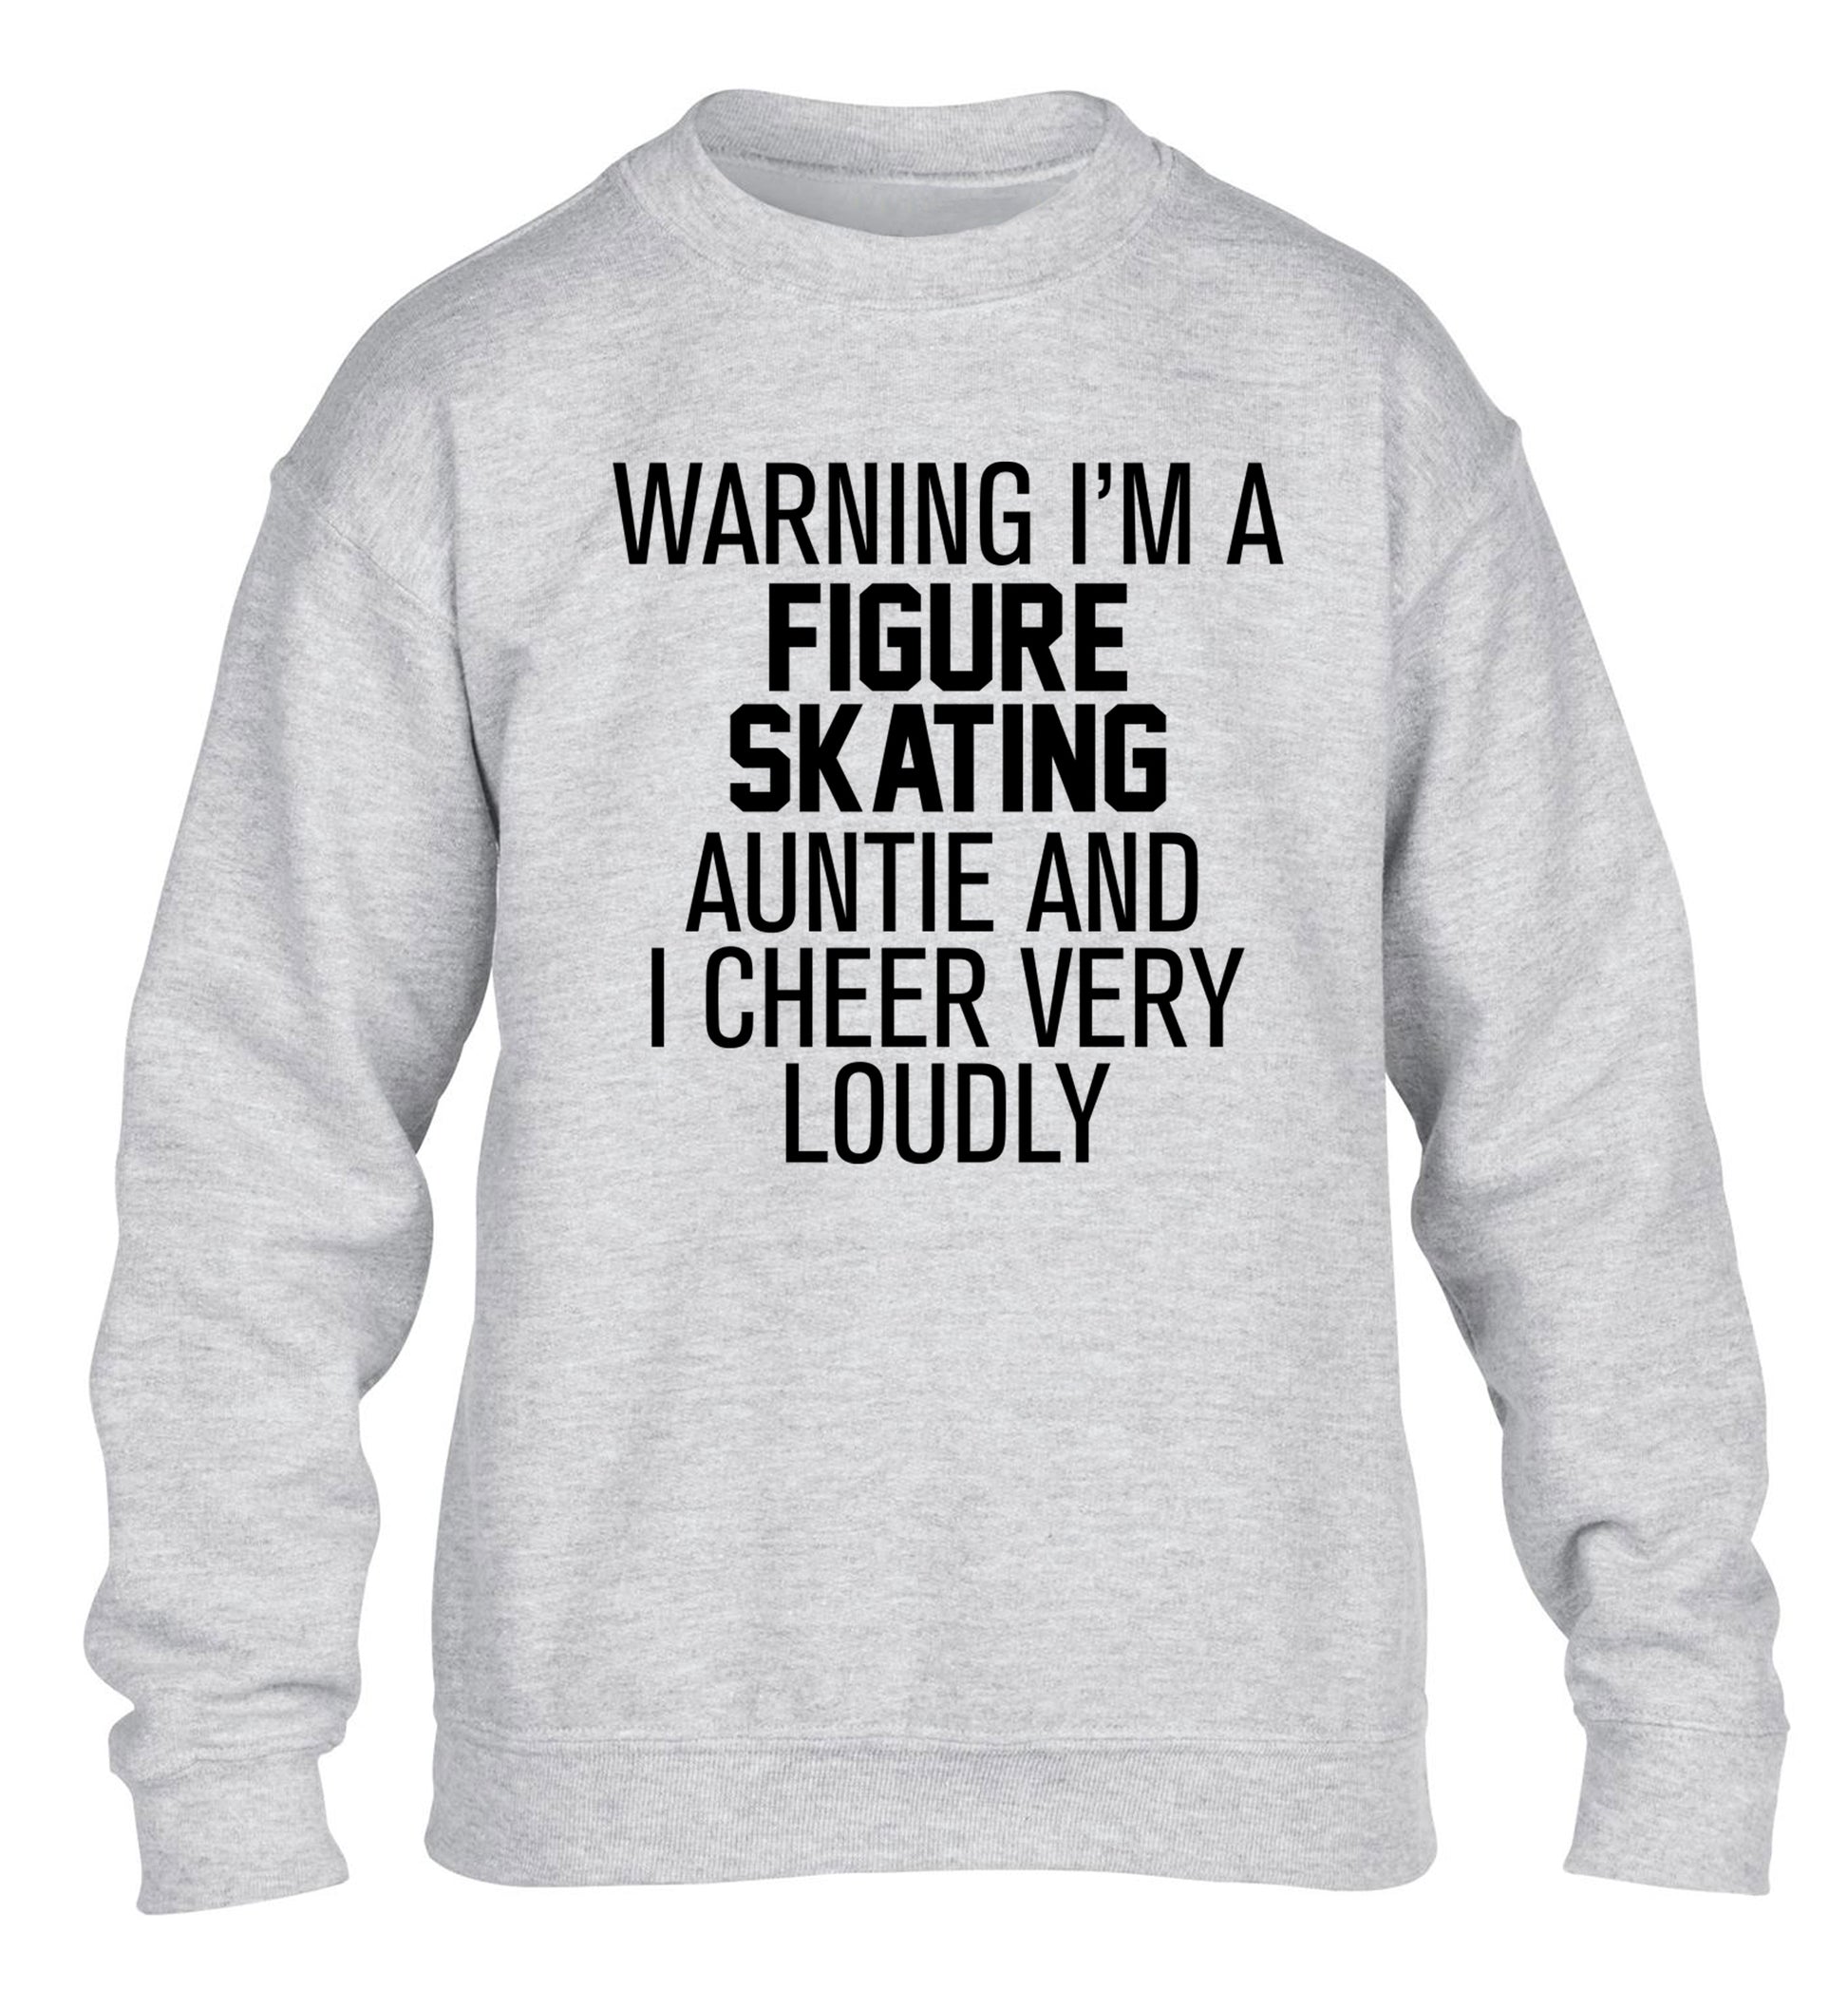 Warning I'm a figure skating auntie and I cheer very loudly children's grey sweater 12-14 Years